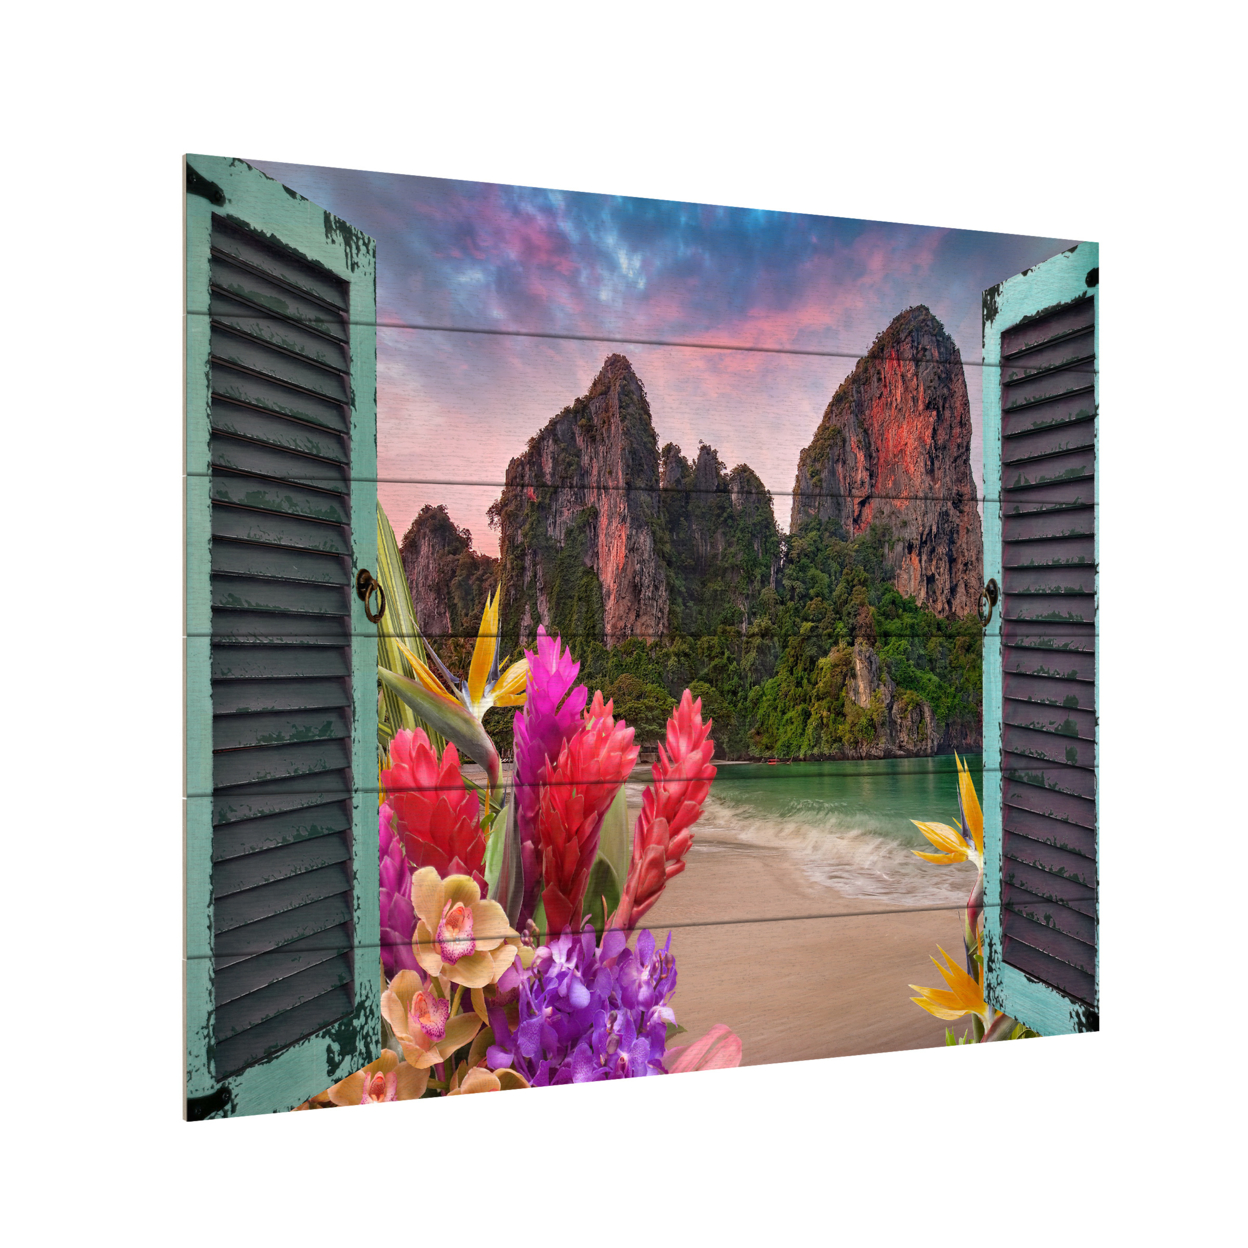 Wooden Slat Art 18 X 22 Inches Titled Window To Paradise VI Ready To Hang Home Decor Picture